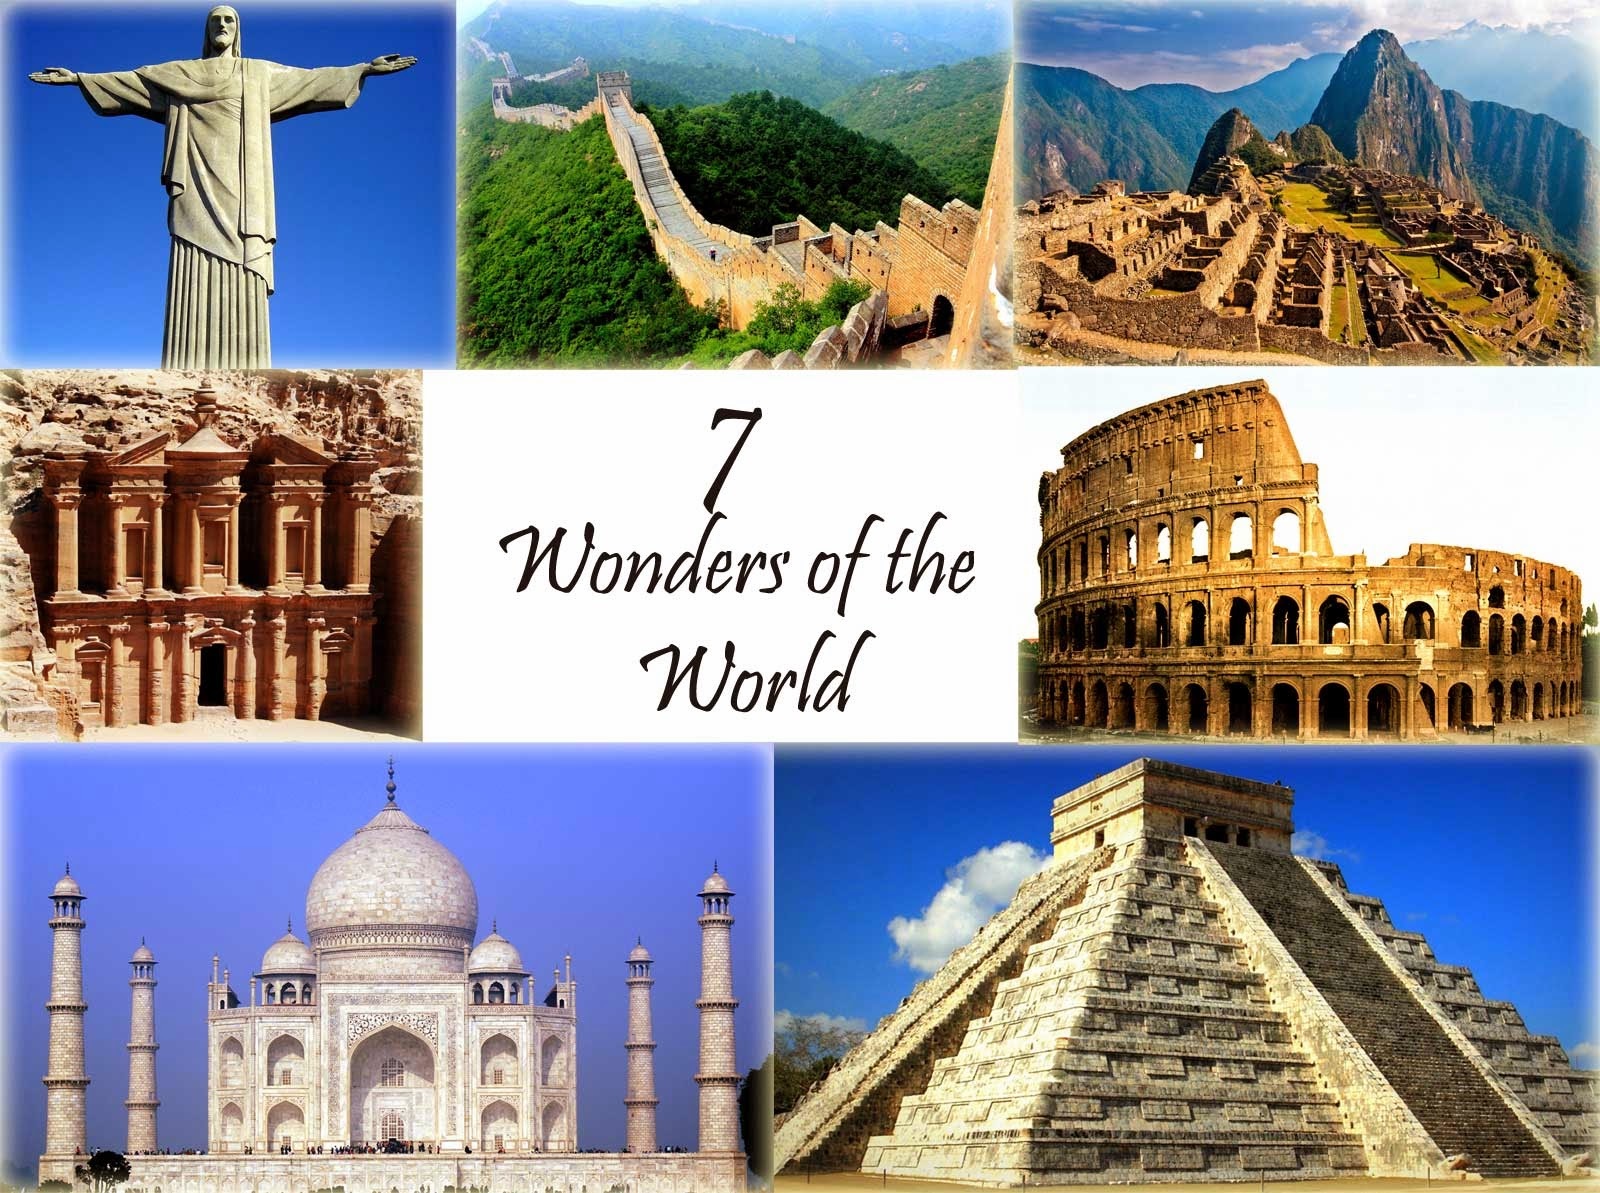 Assembly - Seven Wonders of the World